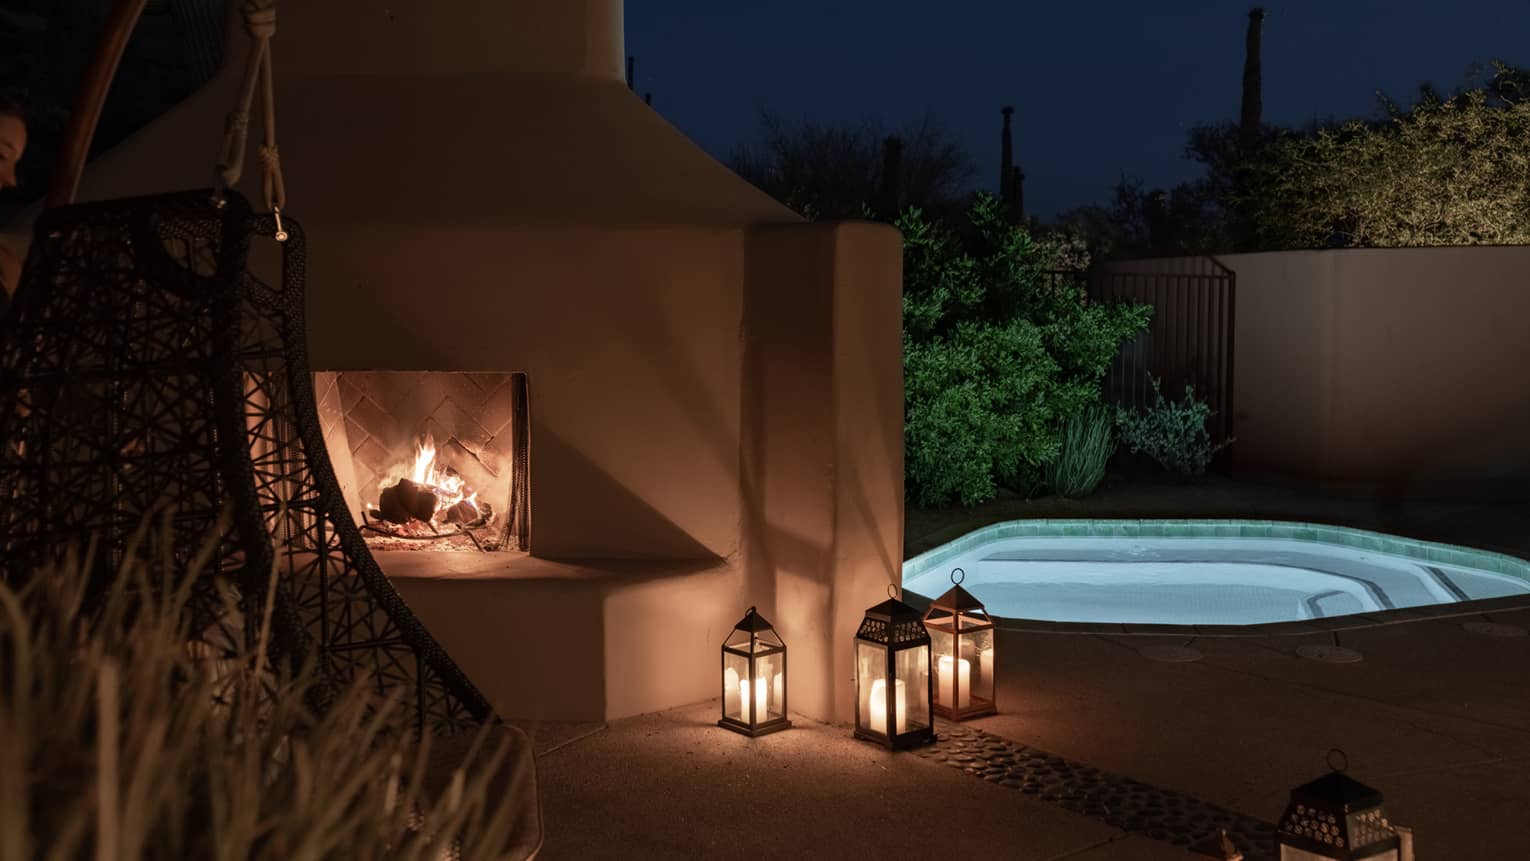 An outdoor fireplace and plunge pool at night.